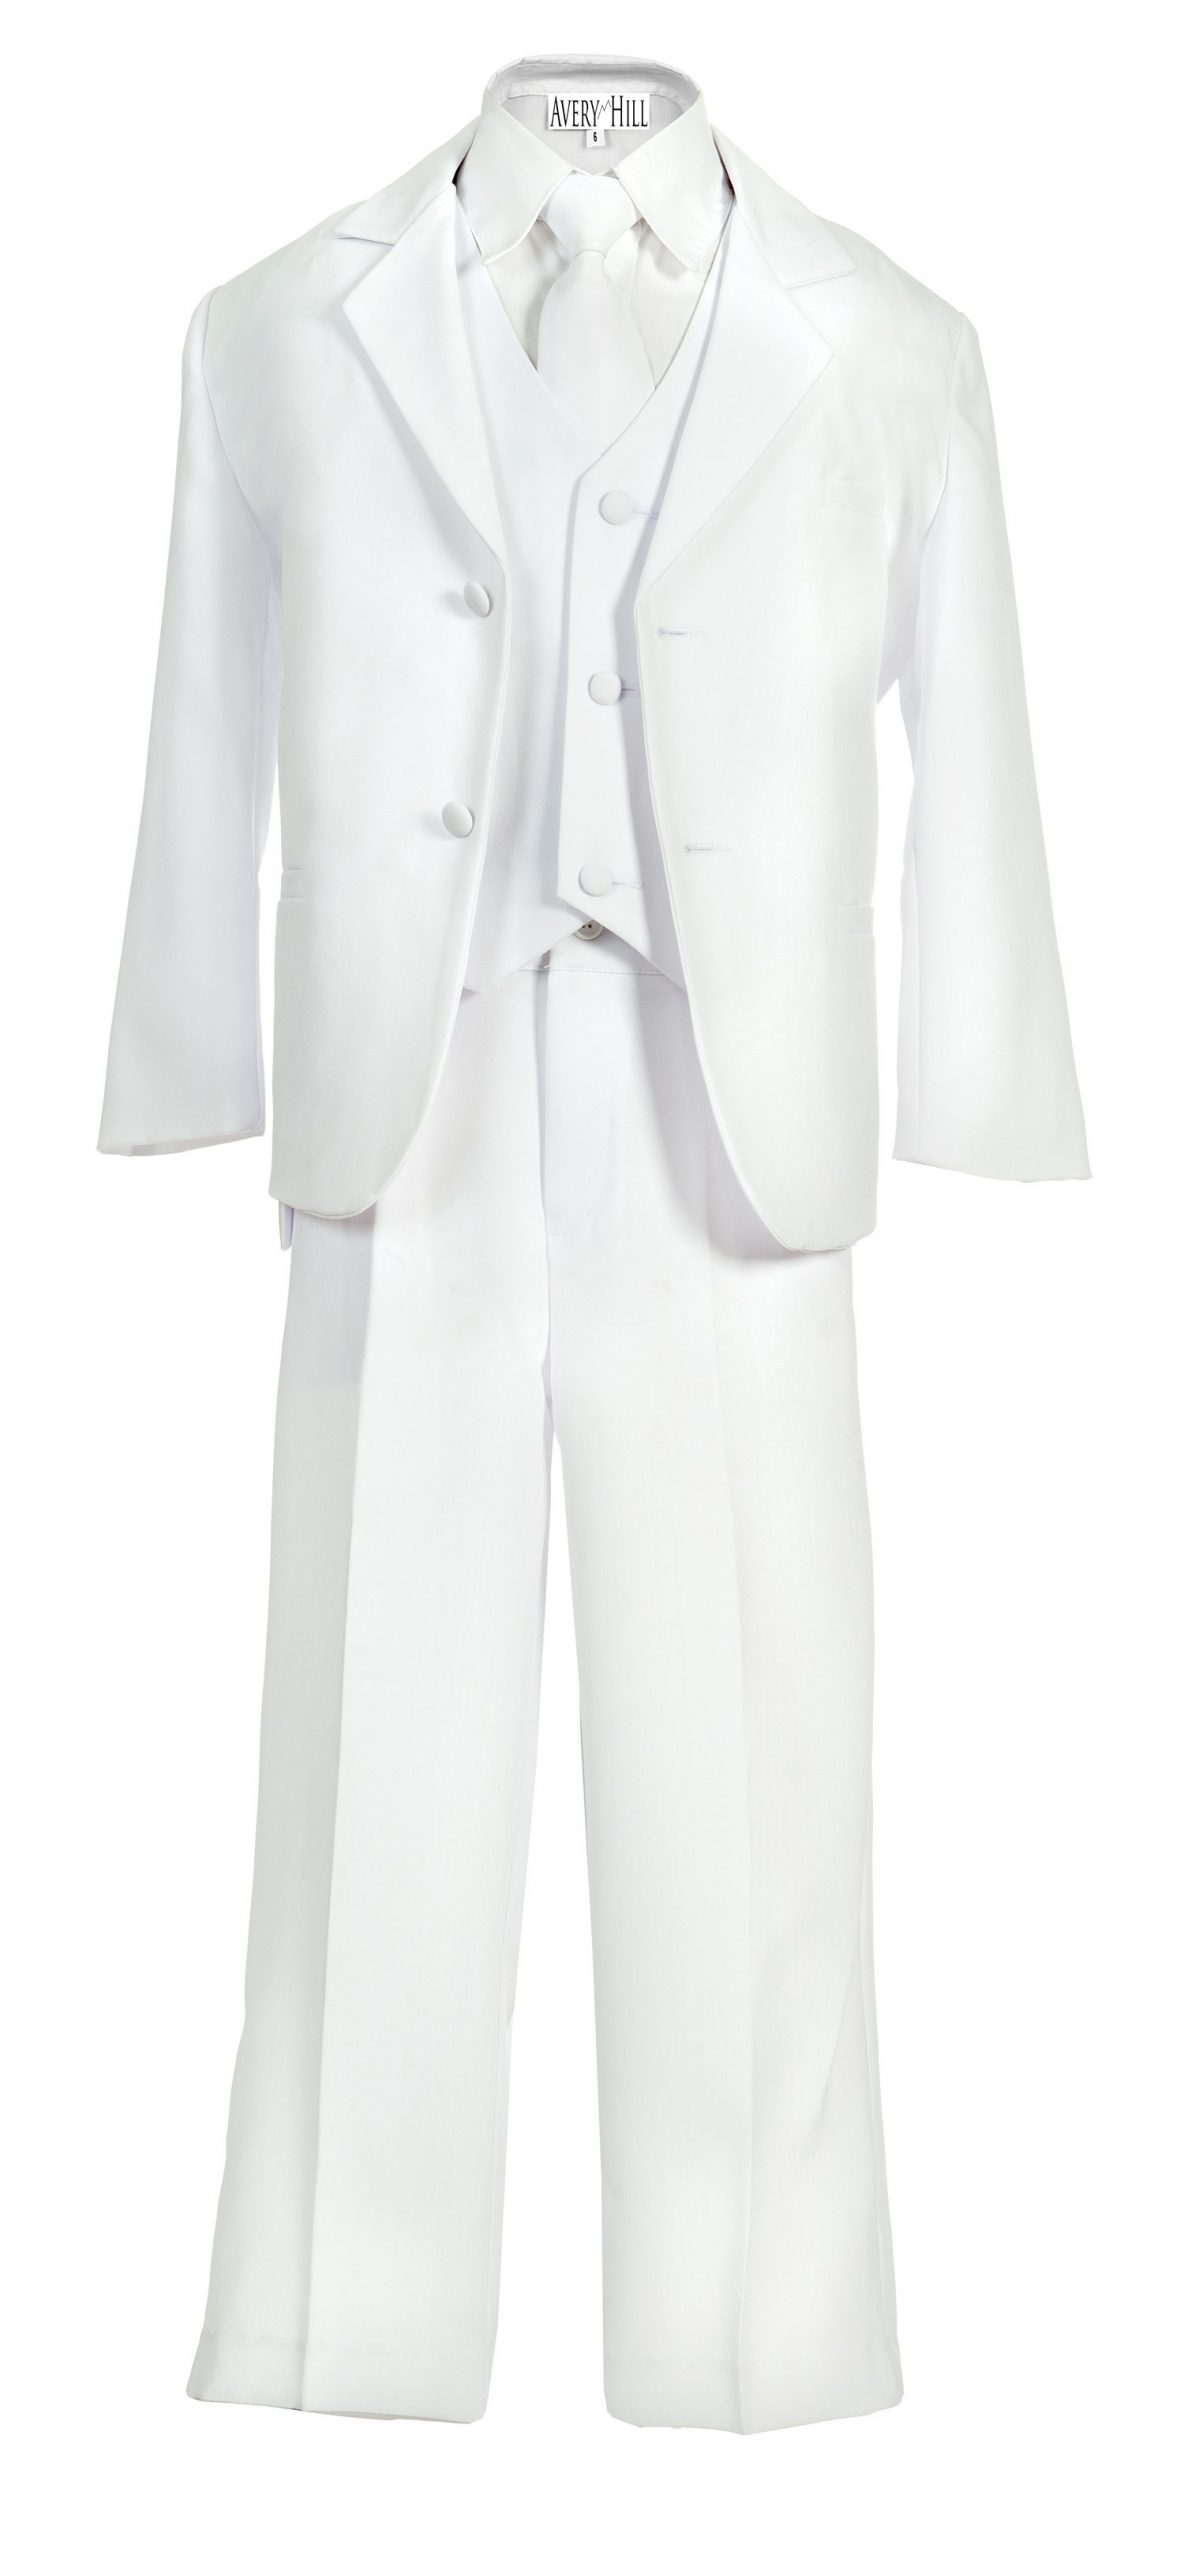 Avery Hill Boys Formal 5 Piece Suit with Shirt and Vest White - 20